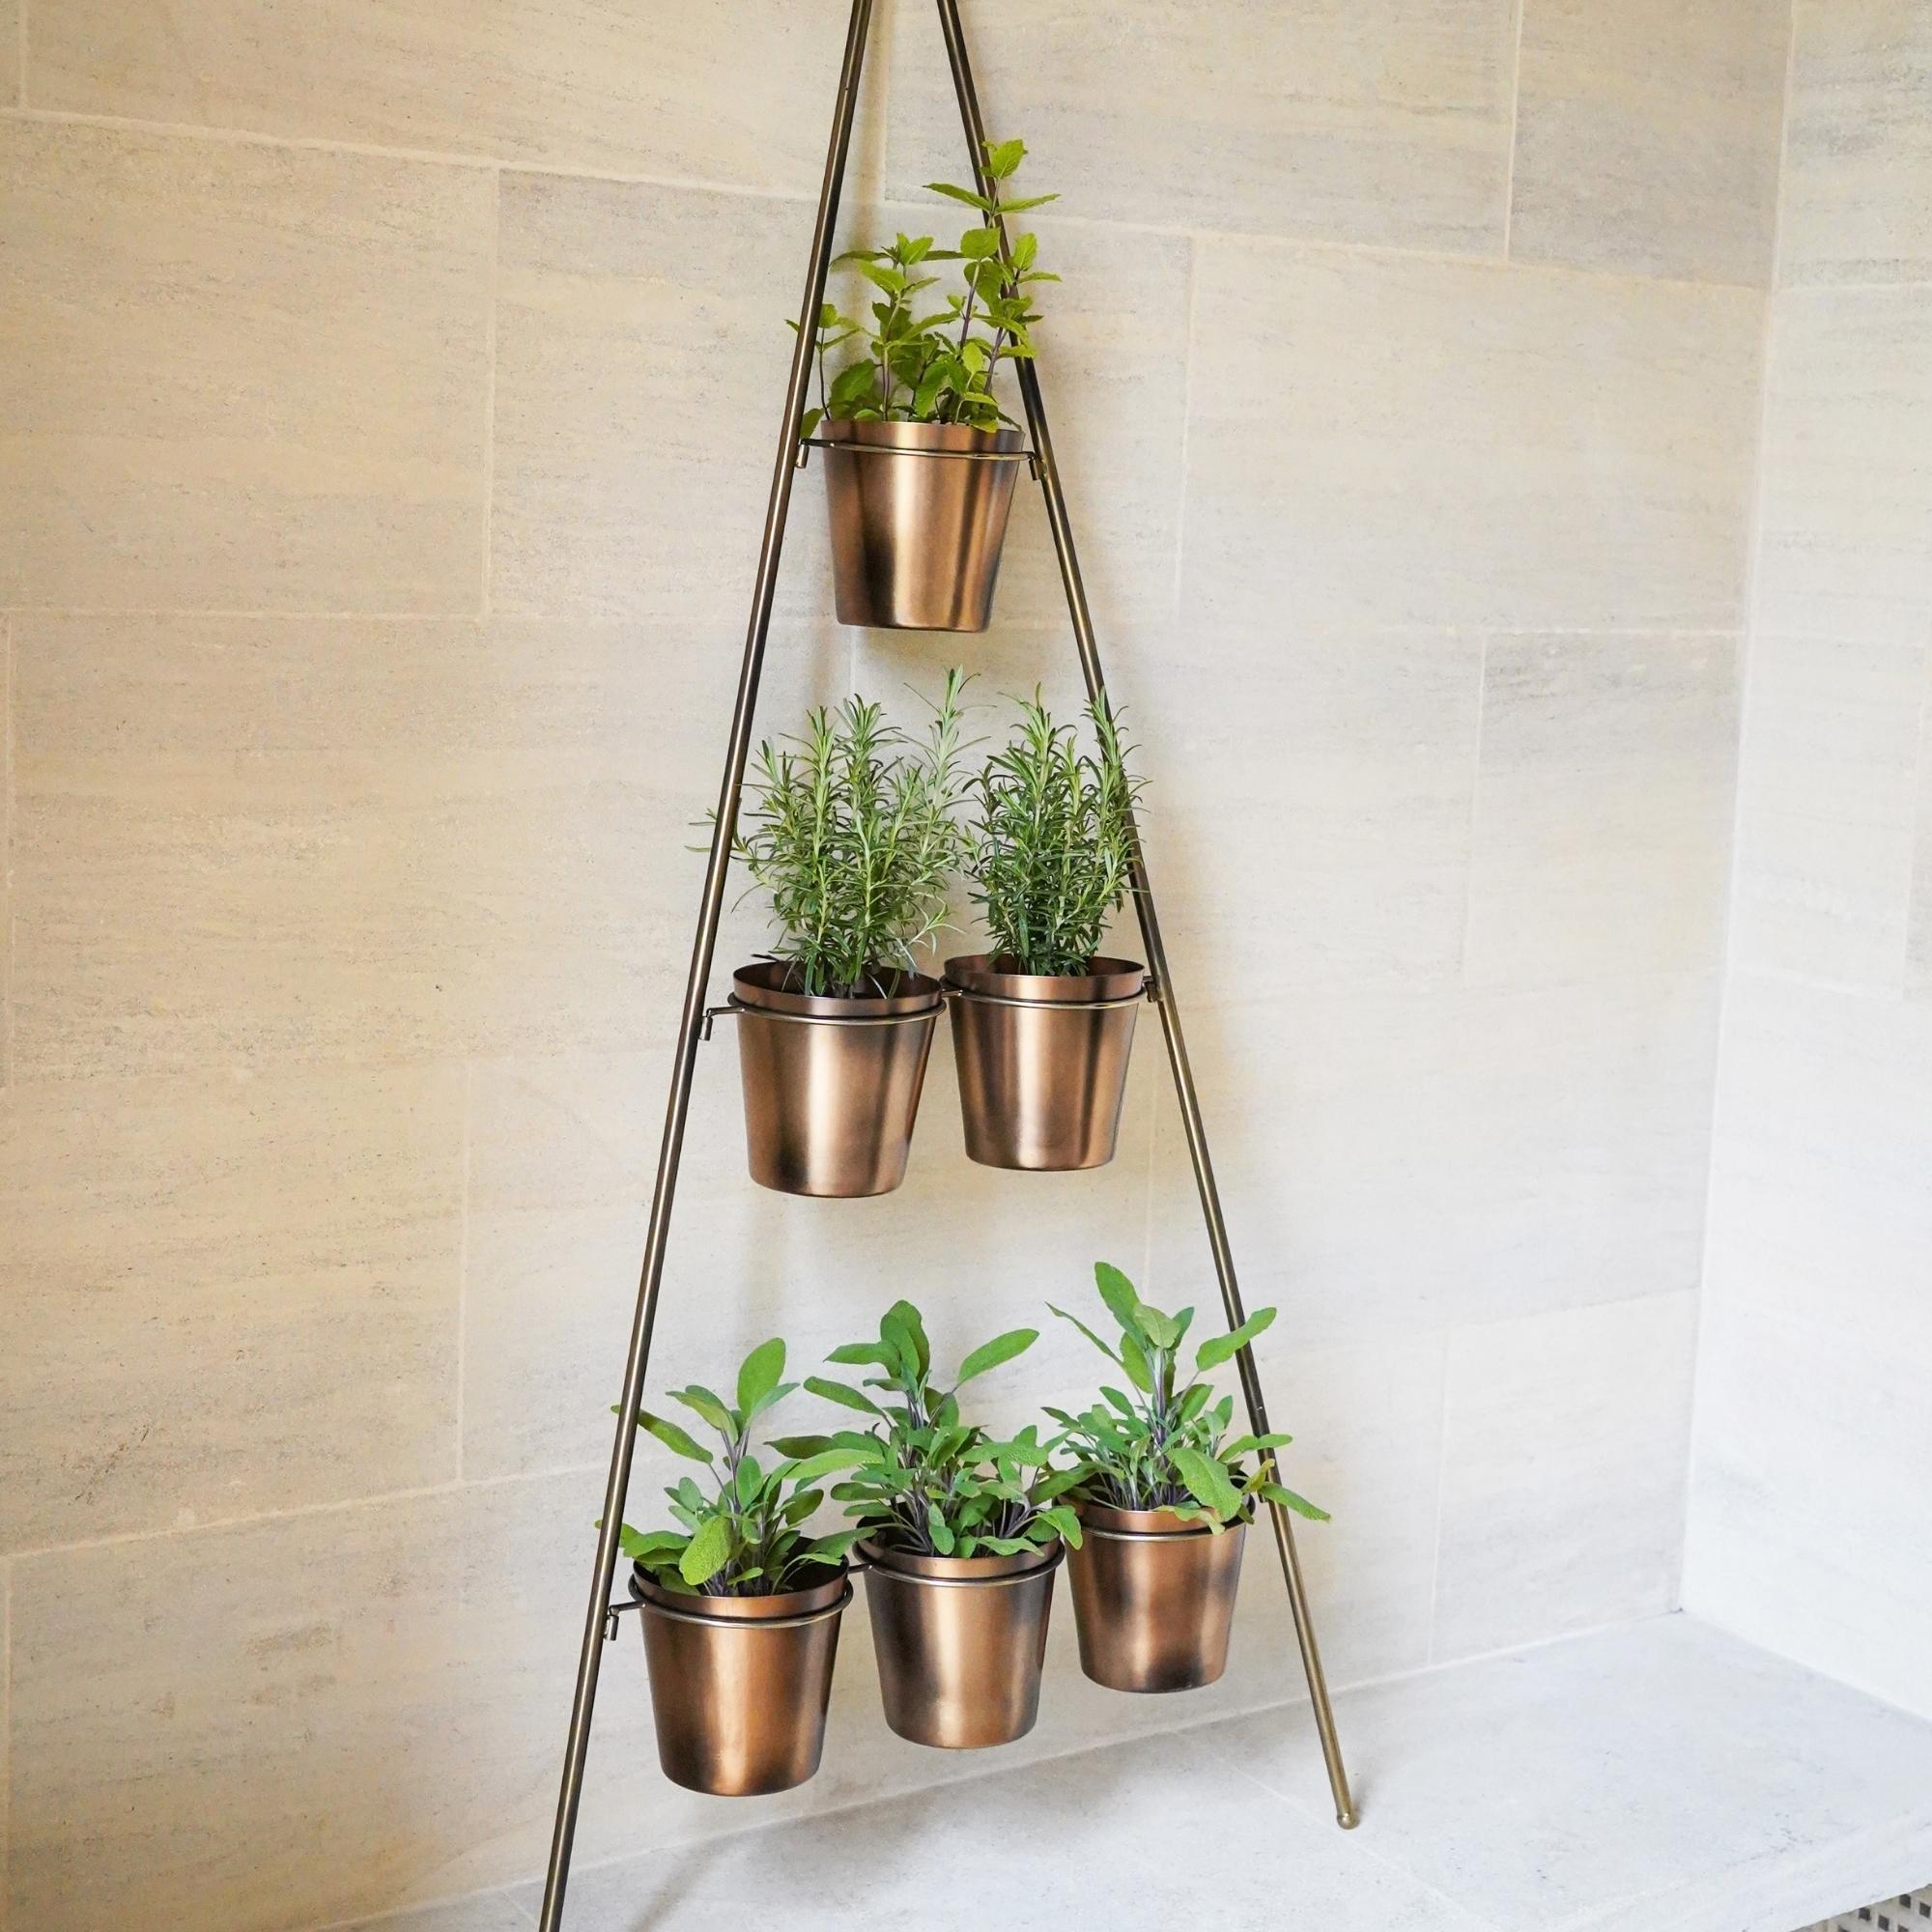 Outdoor Vertical Gold Metal Wall Plant Stand with Planters, H128cm x W51cm, Planter size Ext Diam. 9